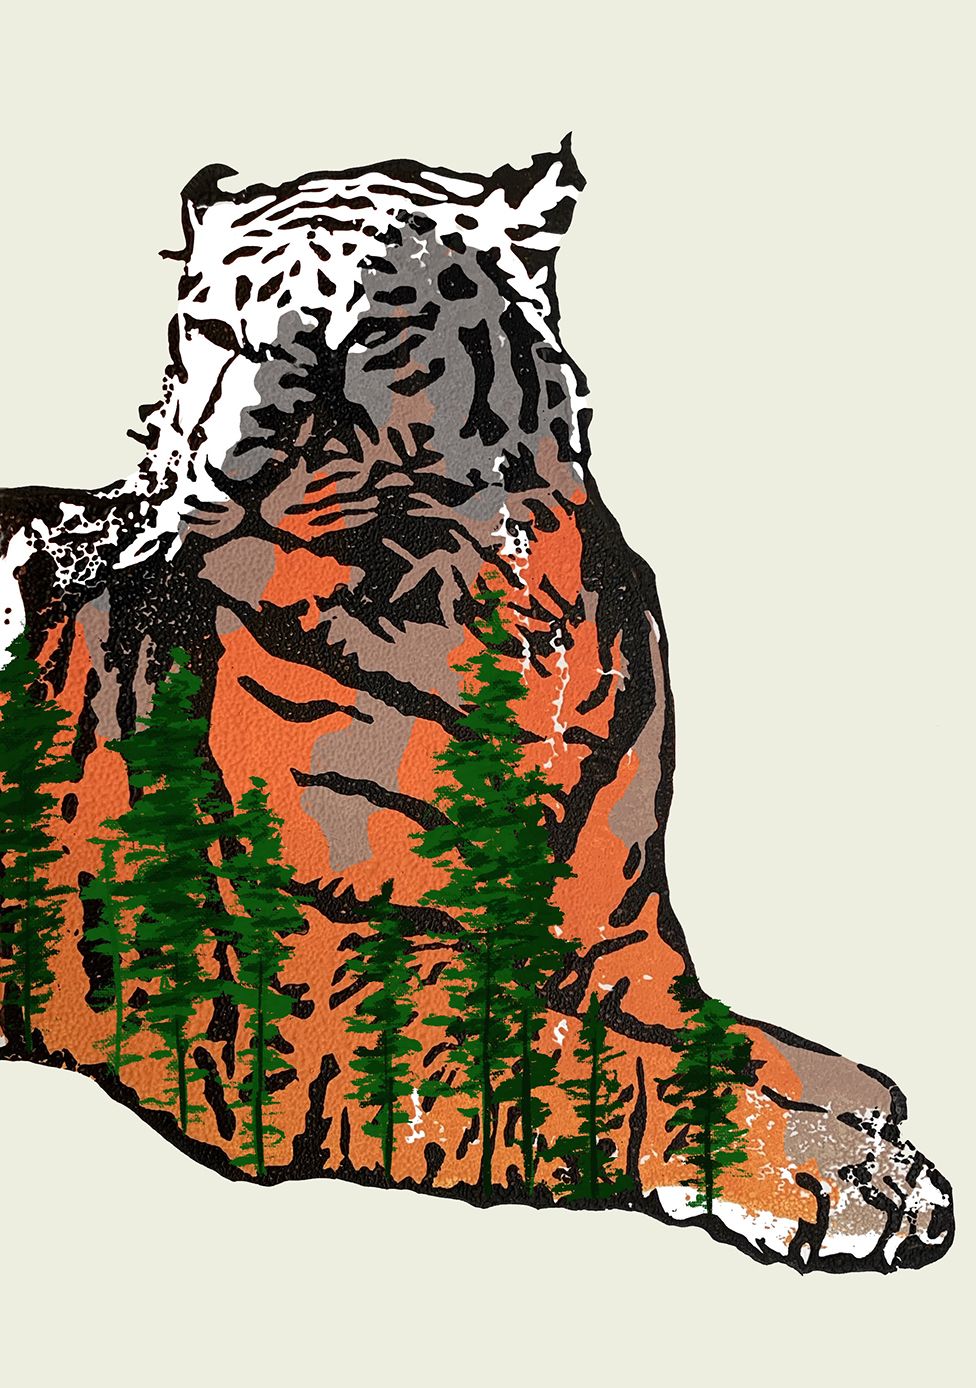 An animation of a tiger and the body shows a view of trees and wildfire